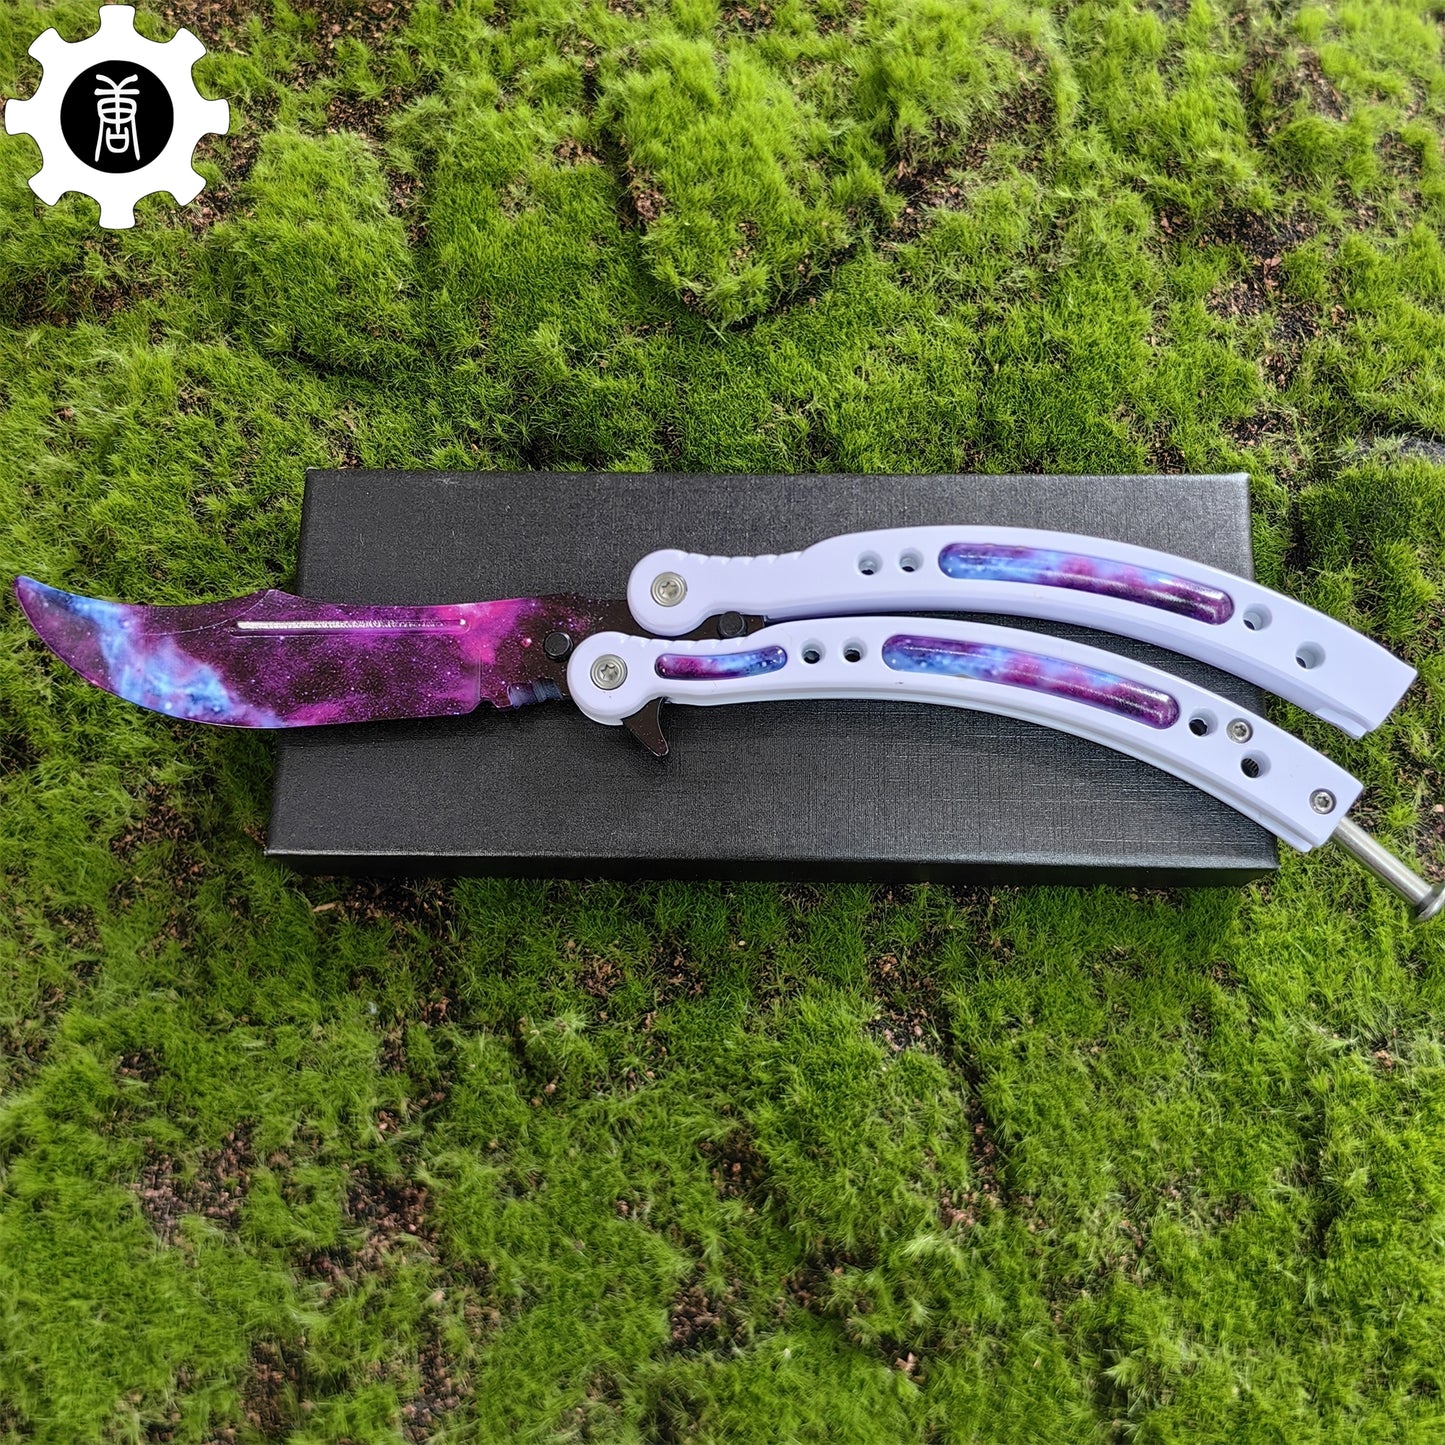 Galaxy Butterfly Knife White Handle Metal Balisong Trainer